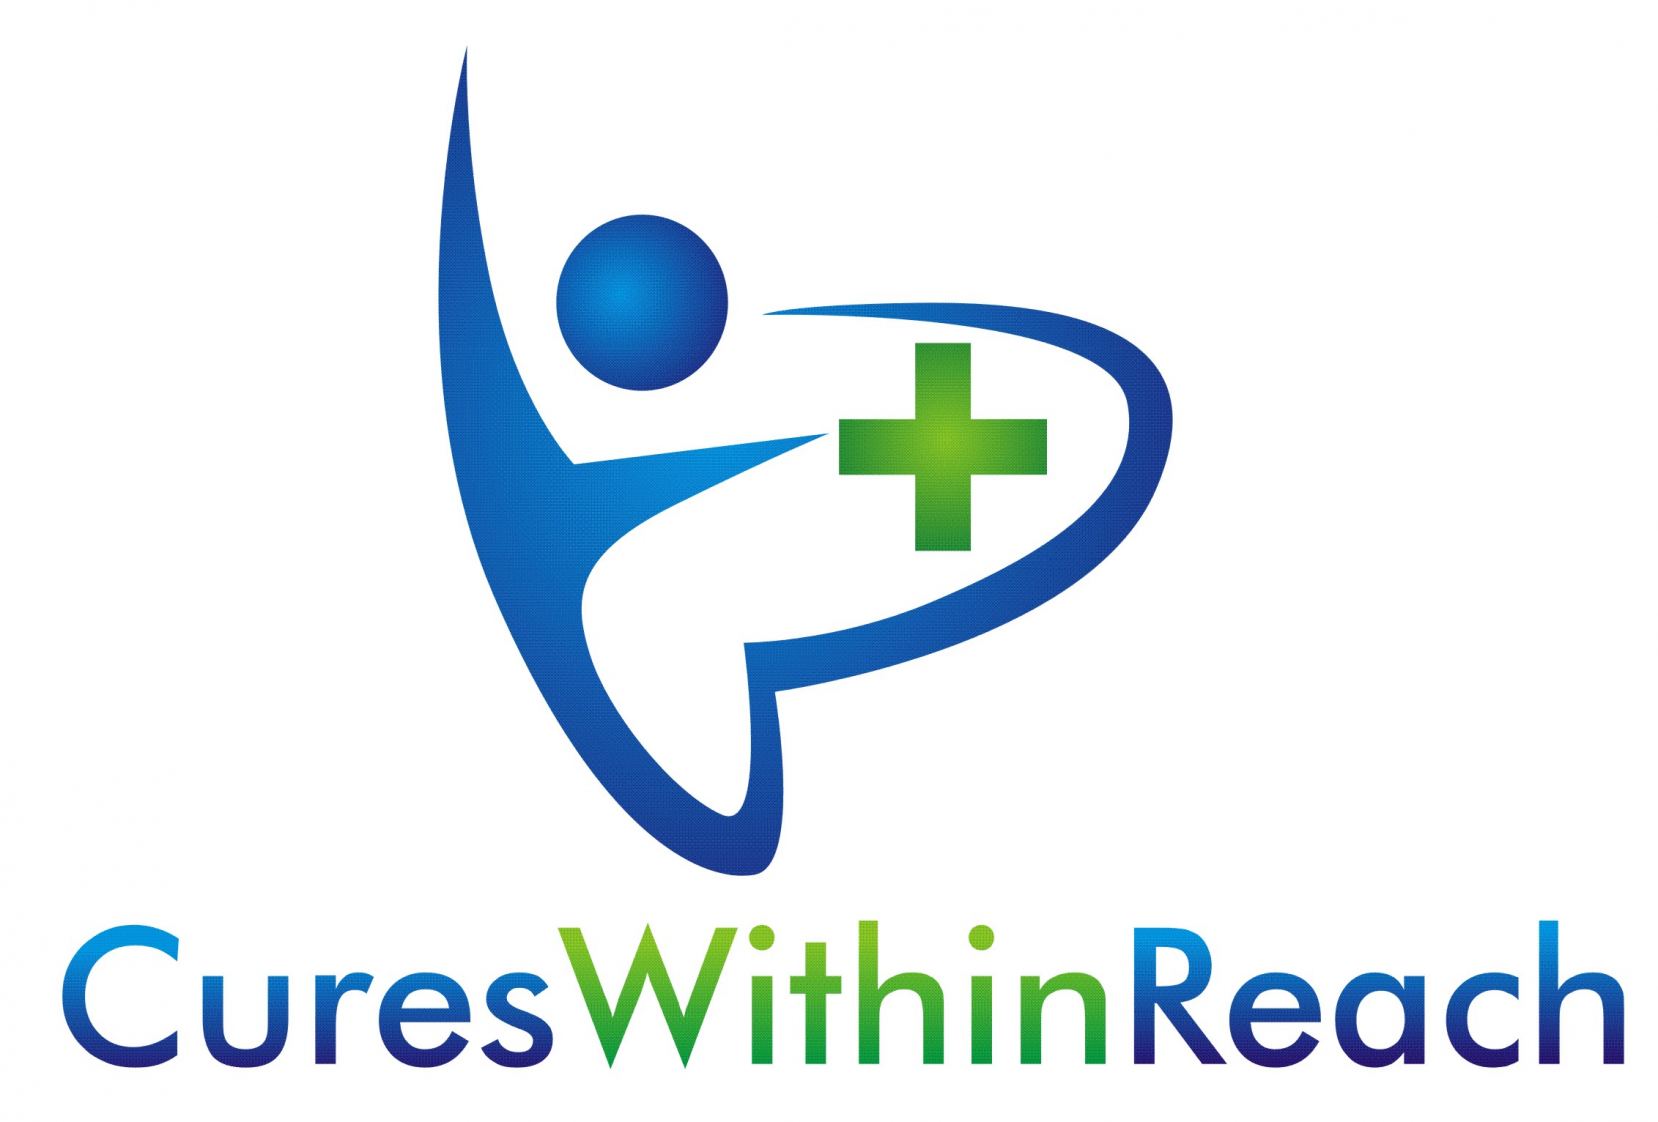 Cures Within Reach Logo